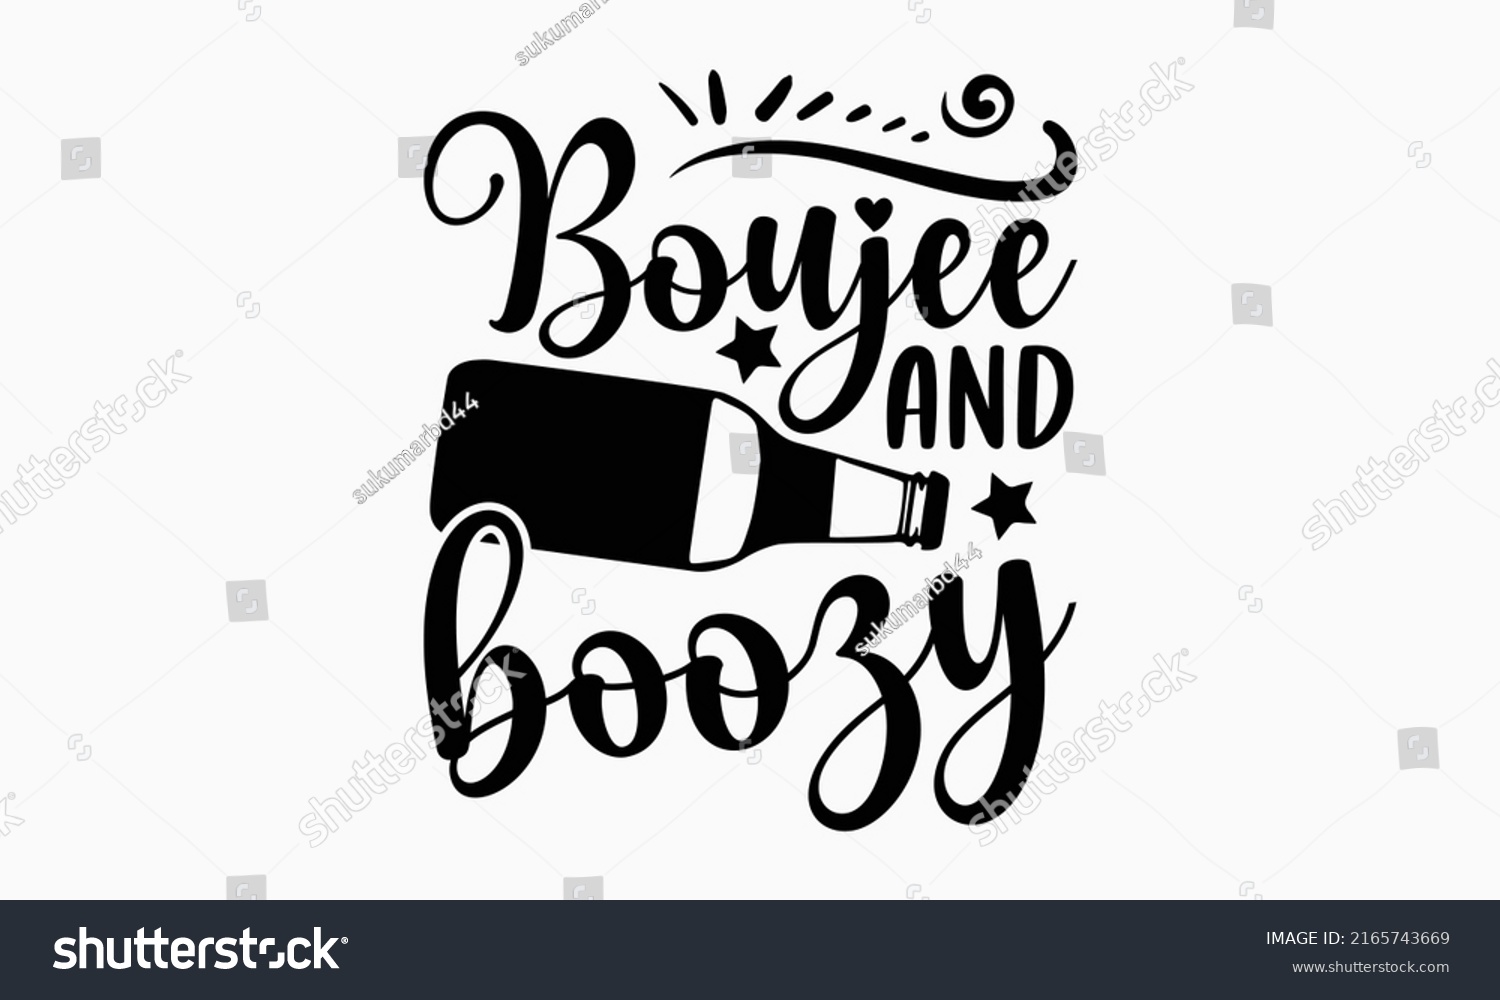 SVG of Boujee and boozy - Alcohol t shirt design, Hand drawn lettering phrase, Calligraphy graphic design, SVG Files for Cutting Cricut and Silhouette svg